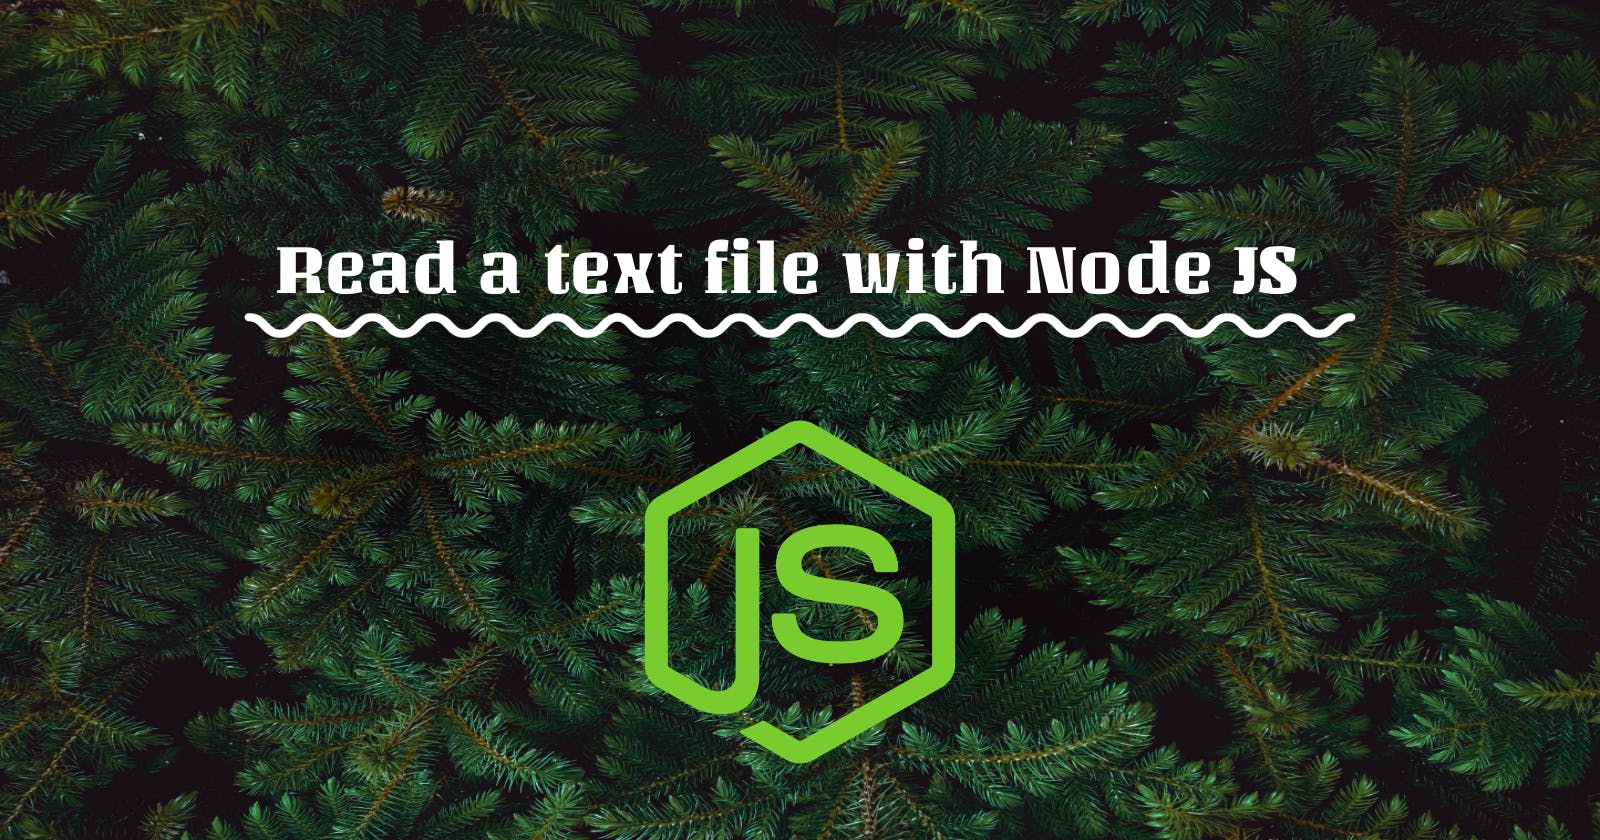 Read a text file with Node JS to get input from Advent of Code problems